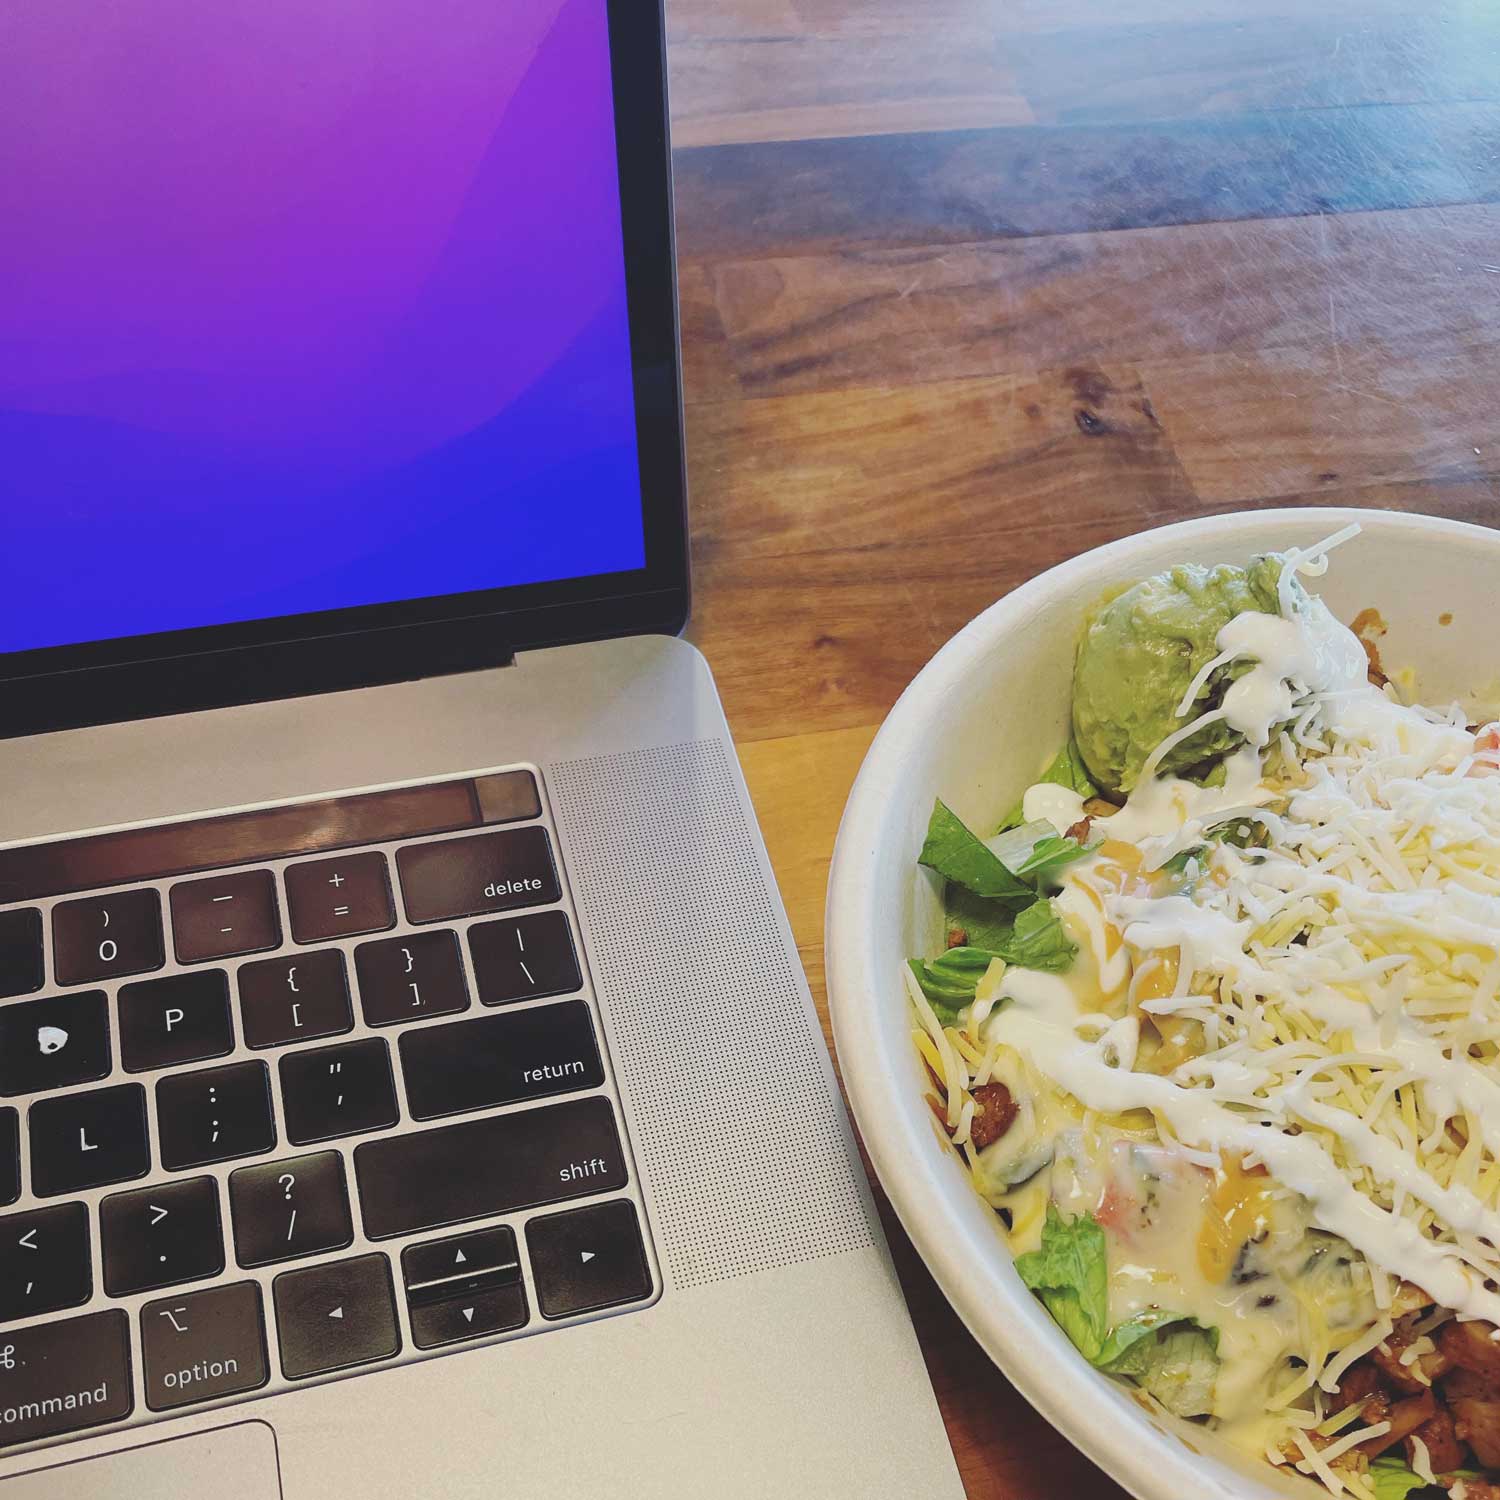 Open laptop on a table with a salad next to it.